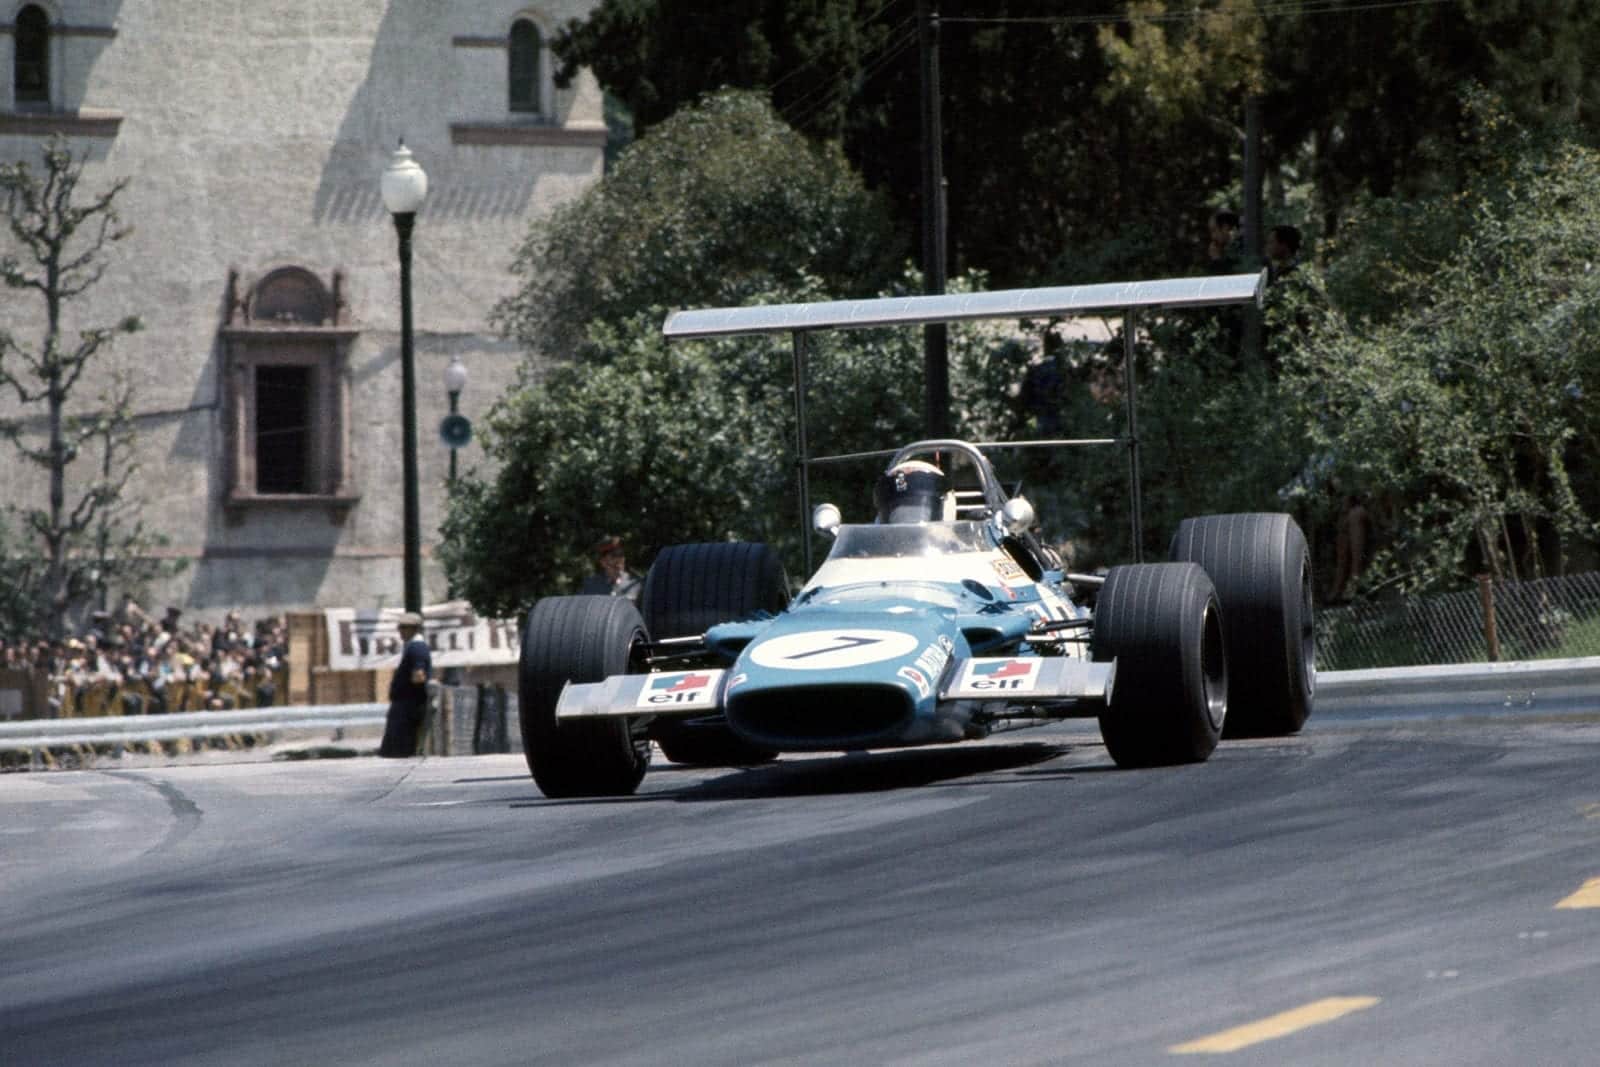 Jackie Stewart in his Matra at the 1969 Spanish Grand Prix.